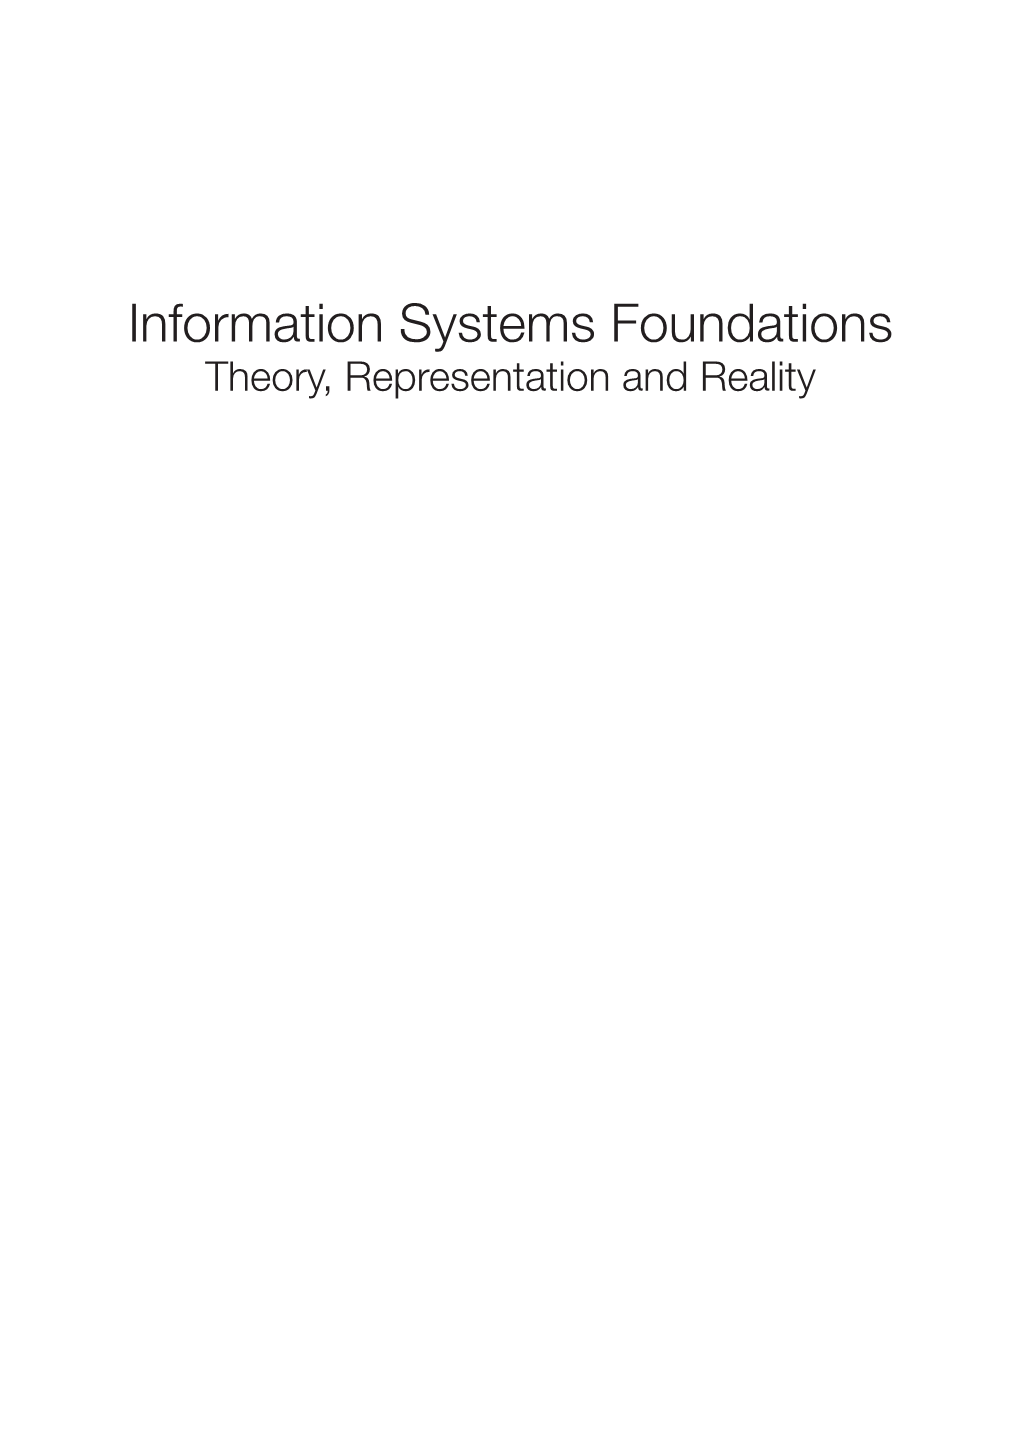 Information Systems Foundations Theory, Representation and Reality